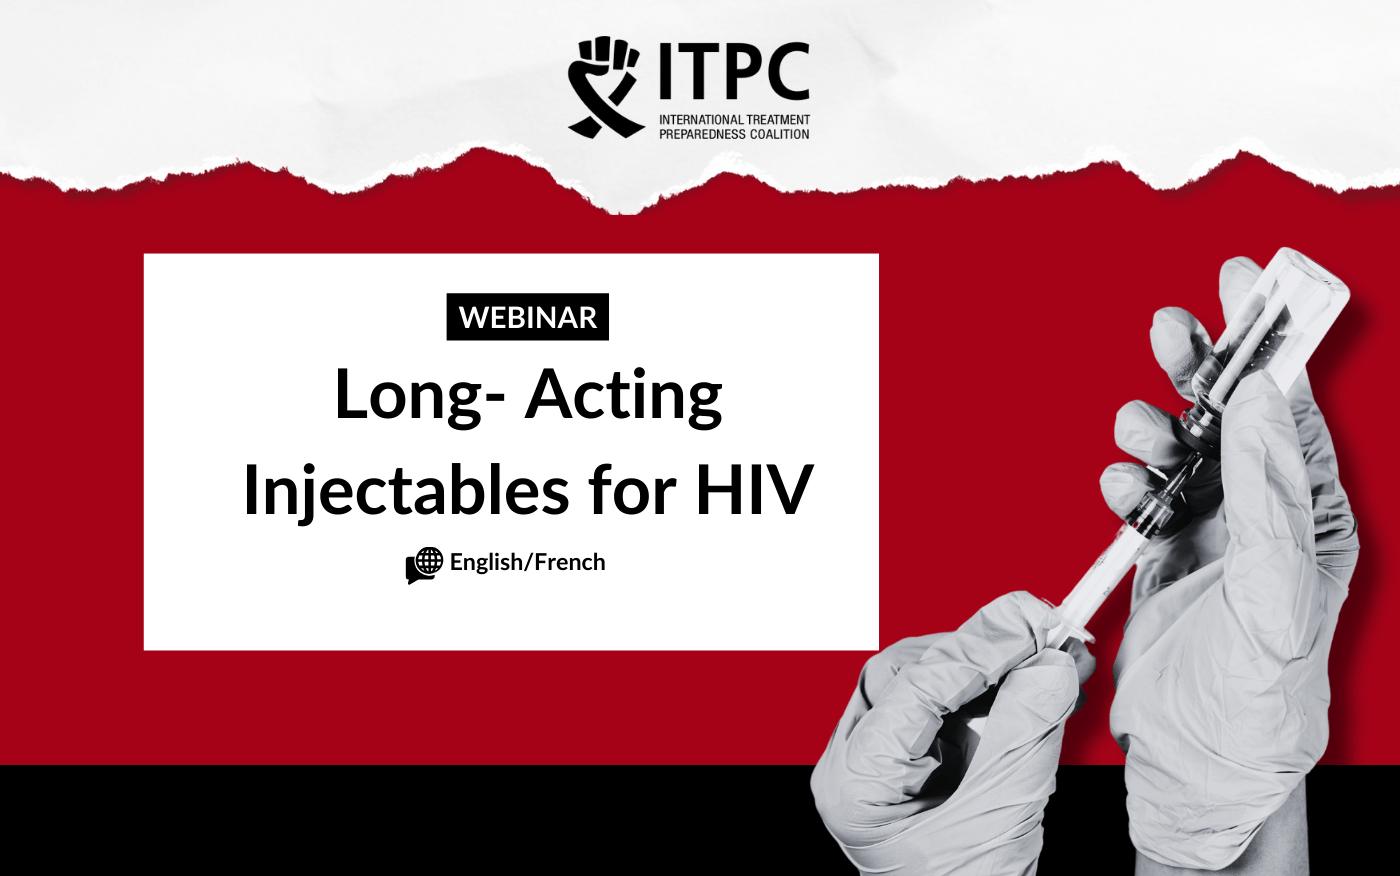 ITPC launches long-acting HIV treatment resources & hosts webinar